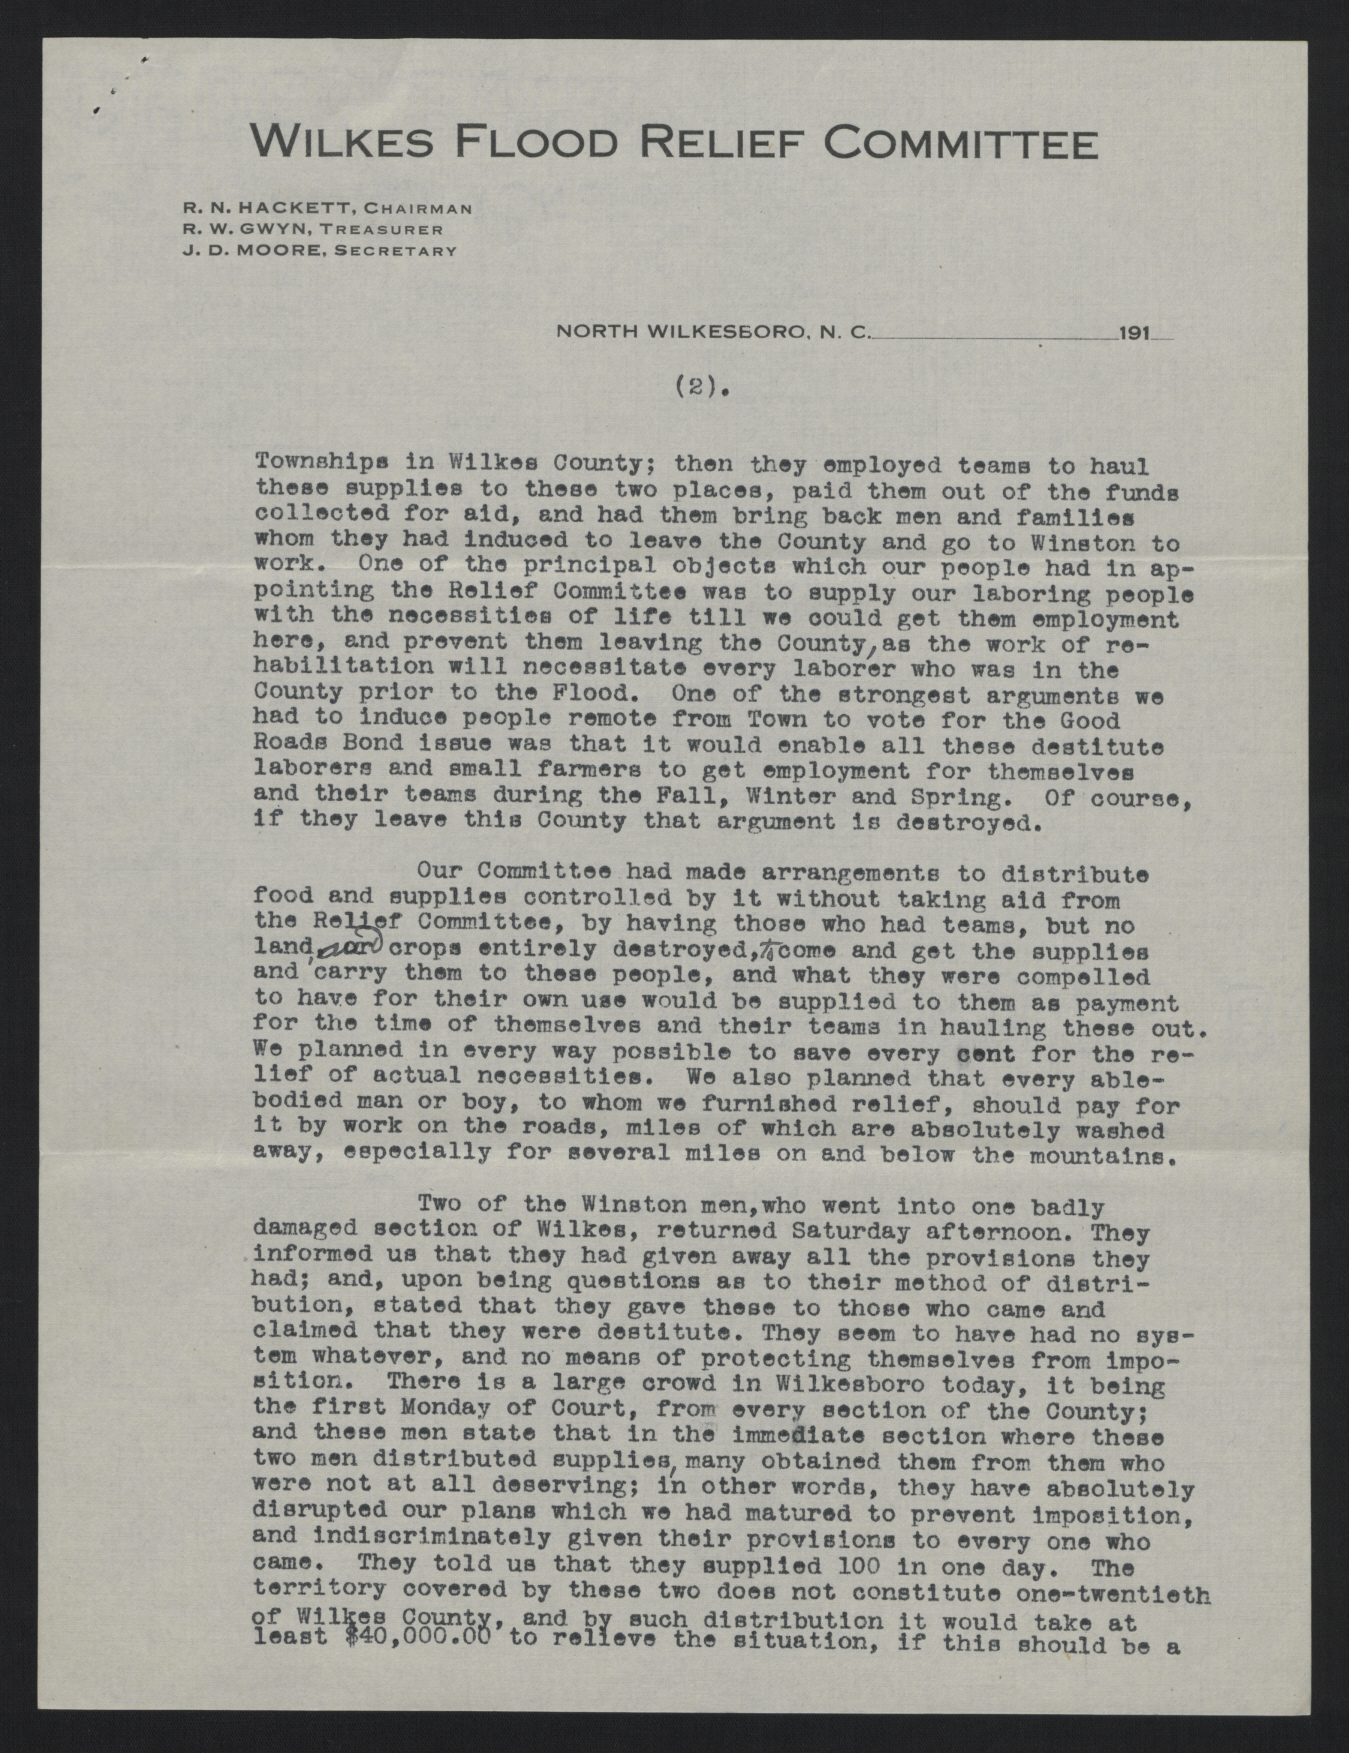 Letter from Wilkes Flood Relief Committee to Craig, August 7, 1916, page 2